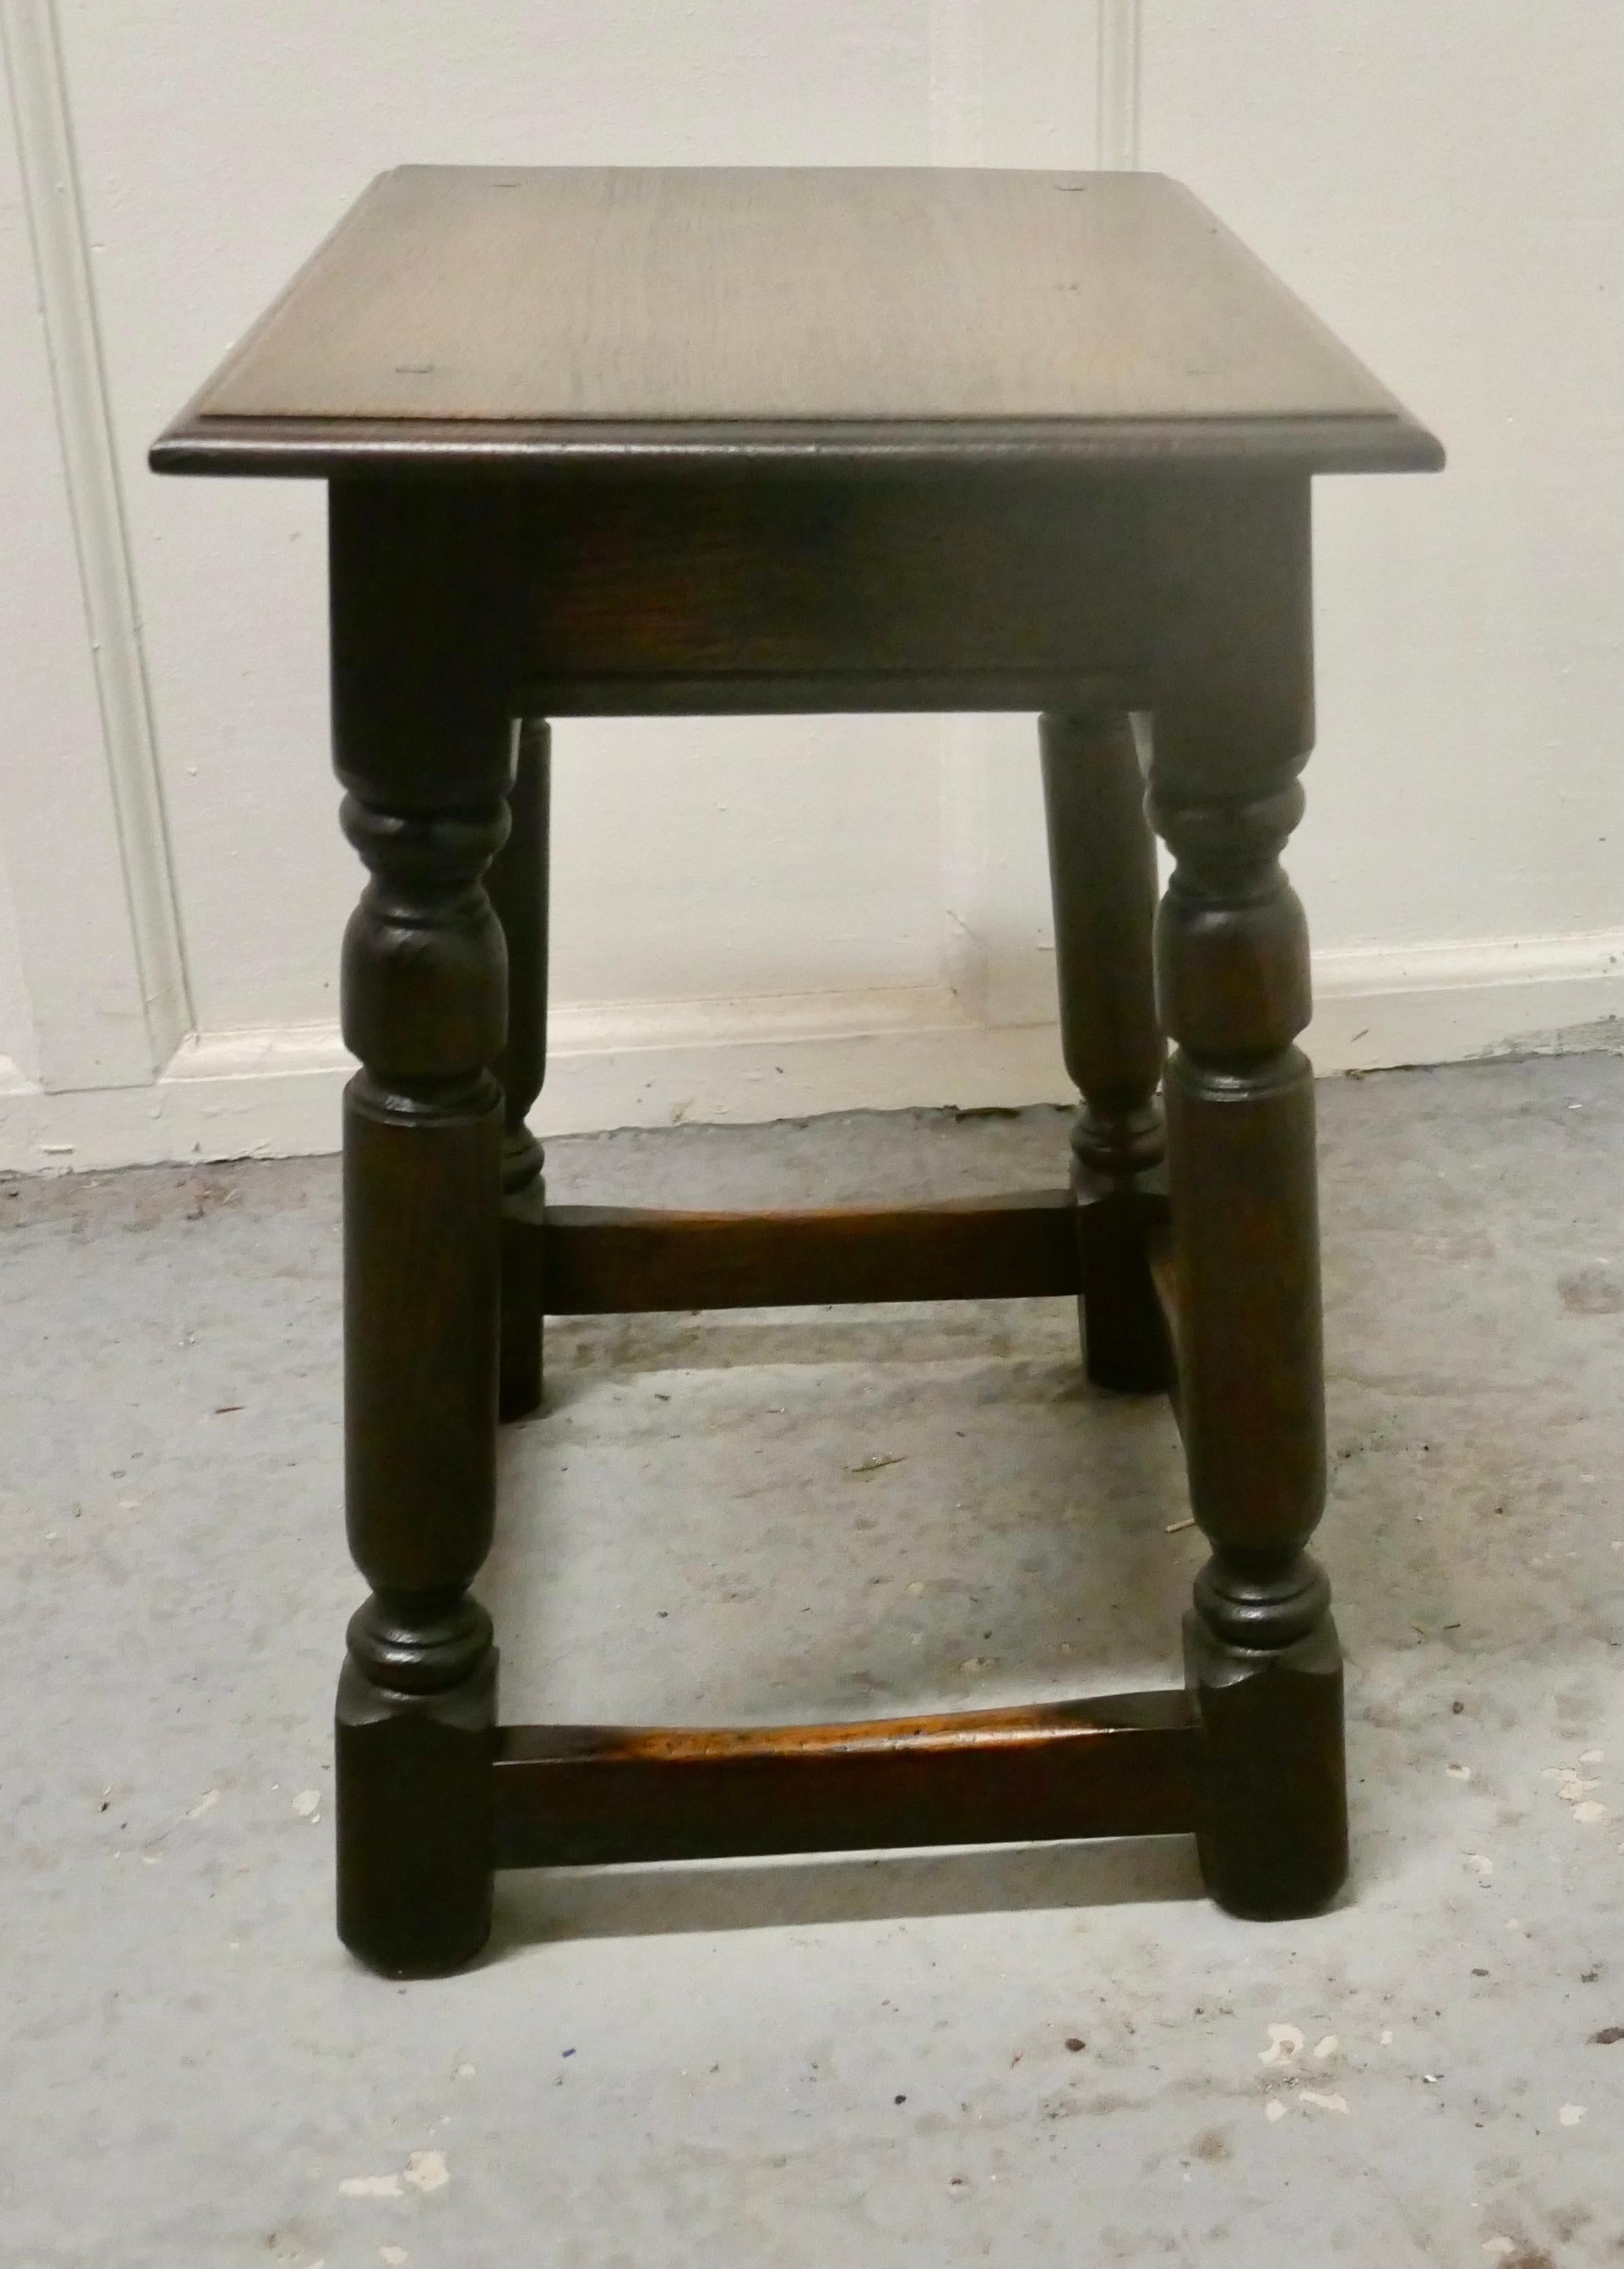 19th century oak joint stool

This a good oak joined stool a good solid stool, it has a good natural color and a lovely patina, it makes a great occasional stool, or even a small side table
The stool is 19” high, 18” wide and 11.5”